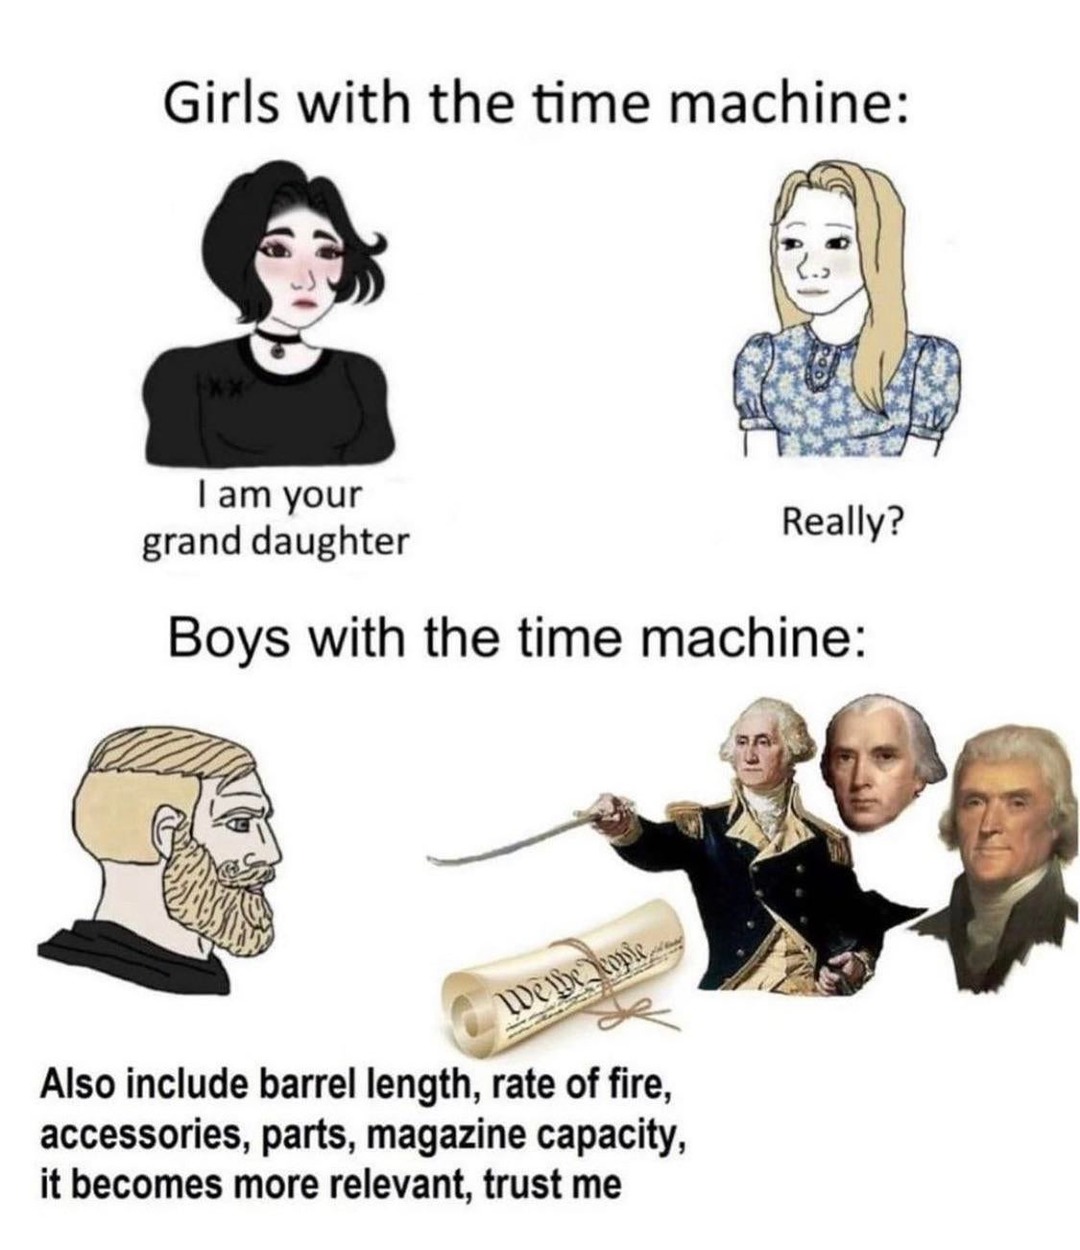 boys vs girls time travel meme - Girls with the time machine I am your grand daughter Really? Boys with the time machine We be copied Also include barrel length, rate of fire, accessories, parts, magazine capacity, it becomes more relevant, trust me